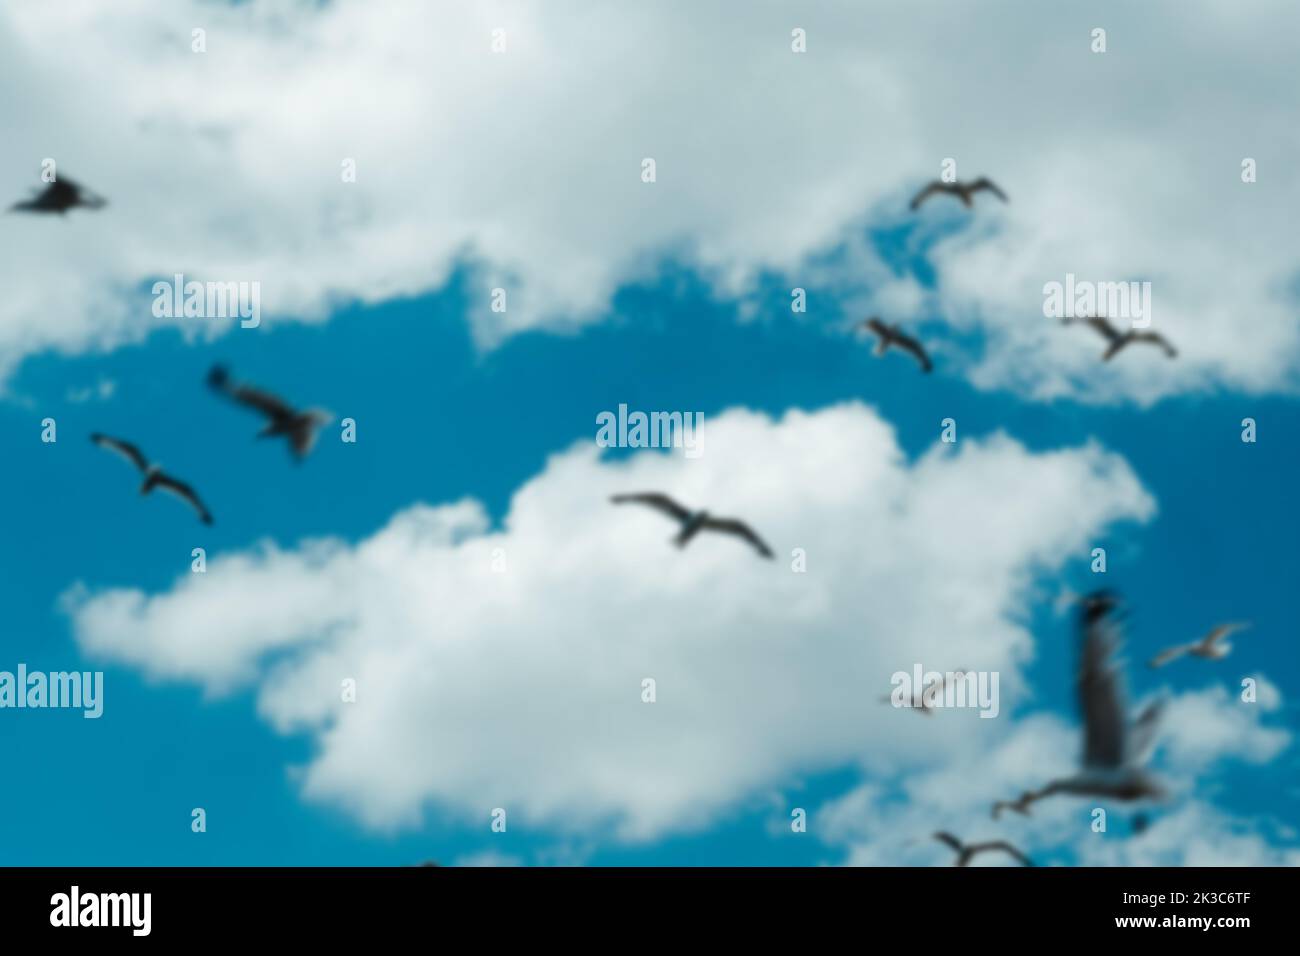 Blue and cloudy sky with seagulls blurred background, beautiful blue landscape with birds flying around, many seagulls in air, freedom and peace Stock Photo